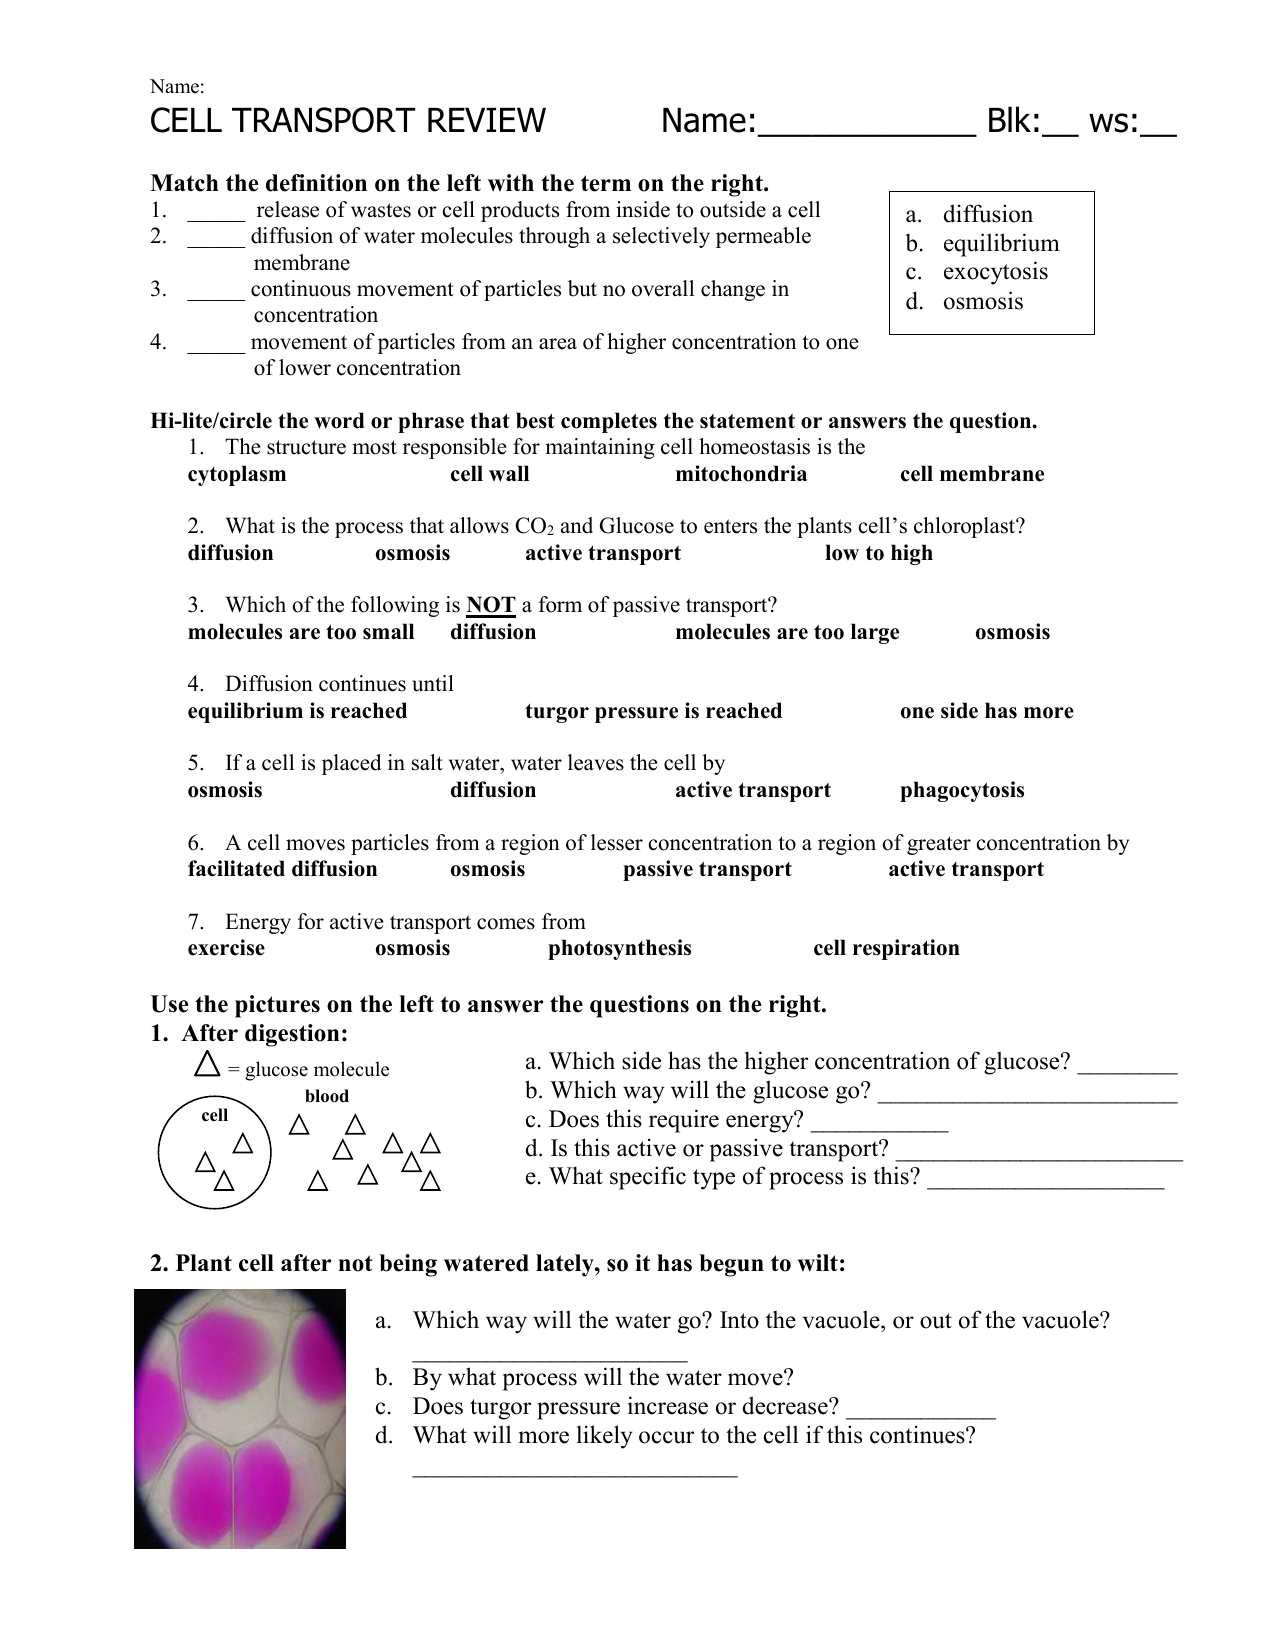 CELL TRANSPORT WORKSHEET Pertaining To Cell Transport Review Worksheet